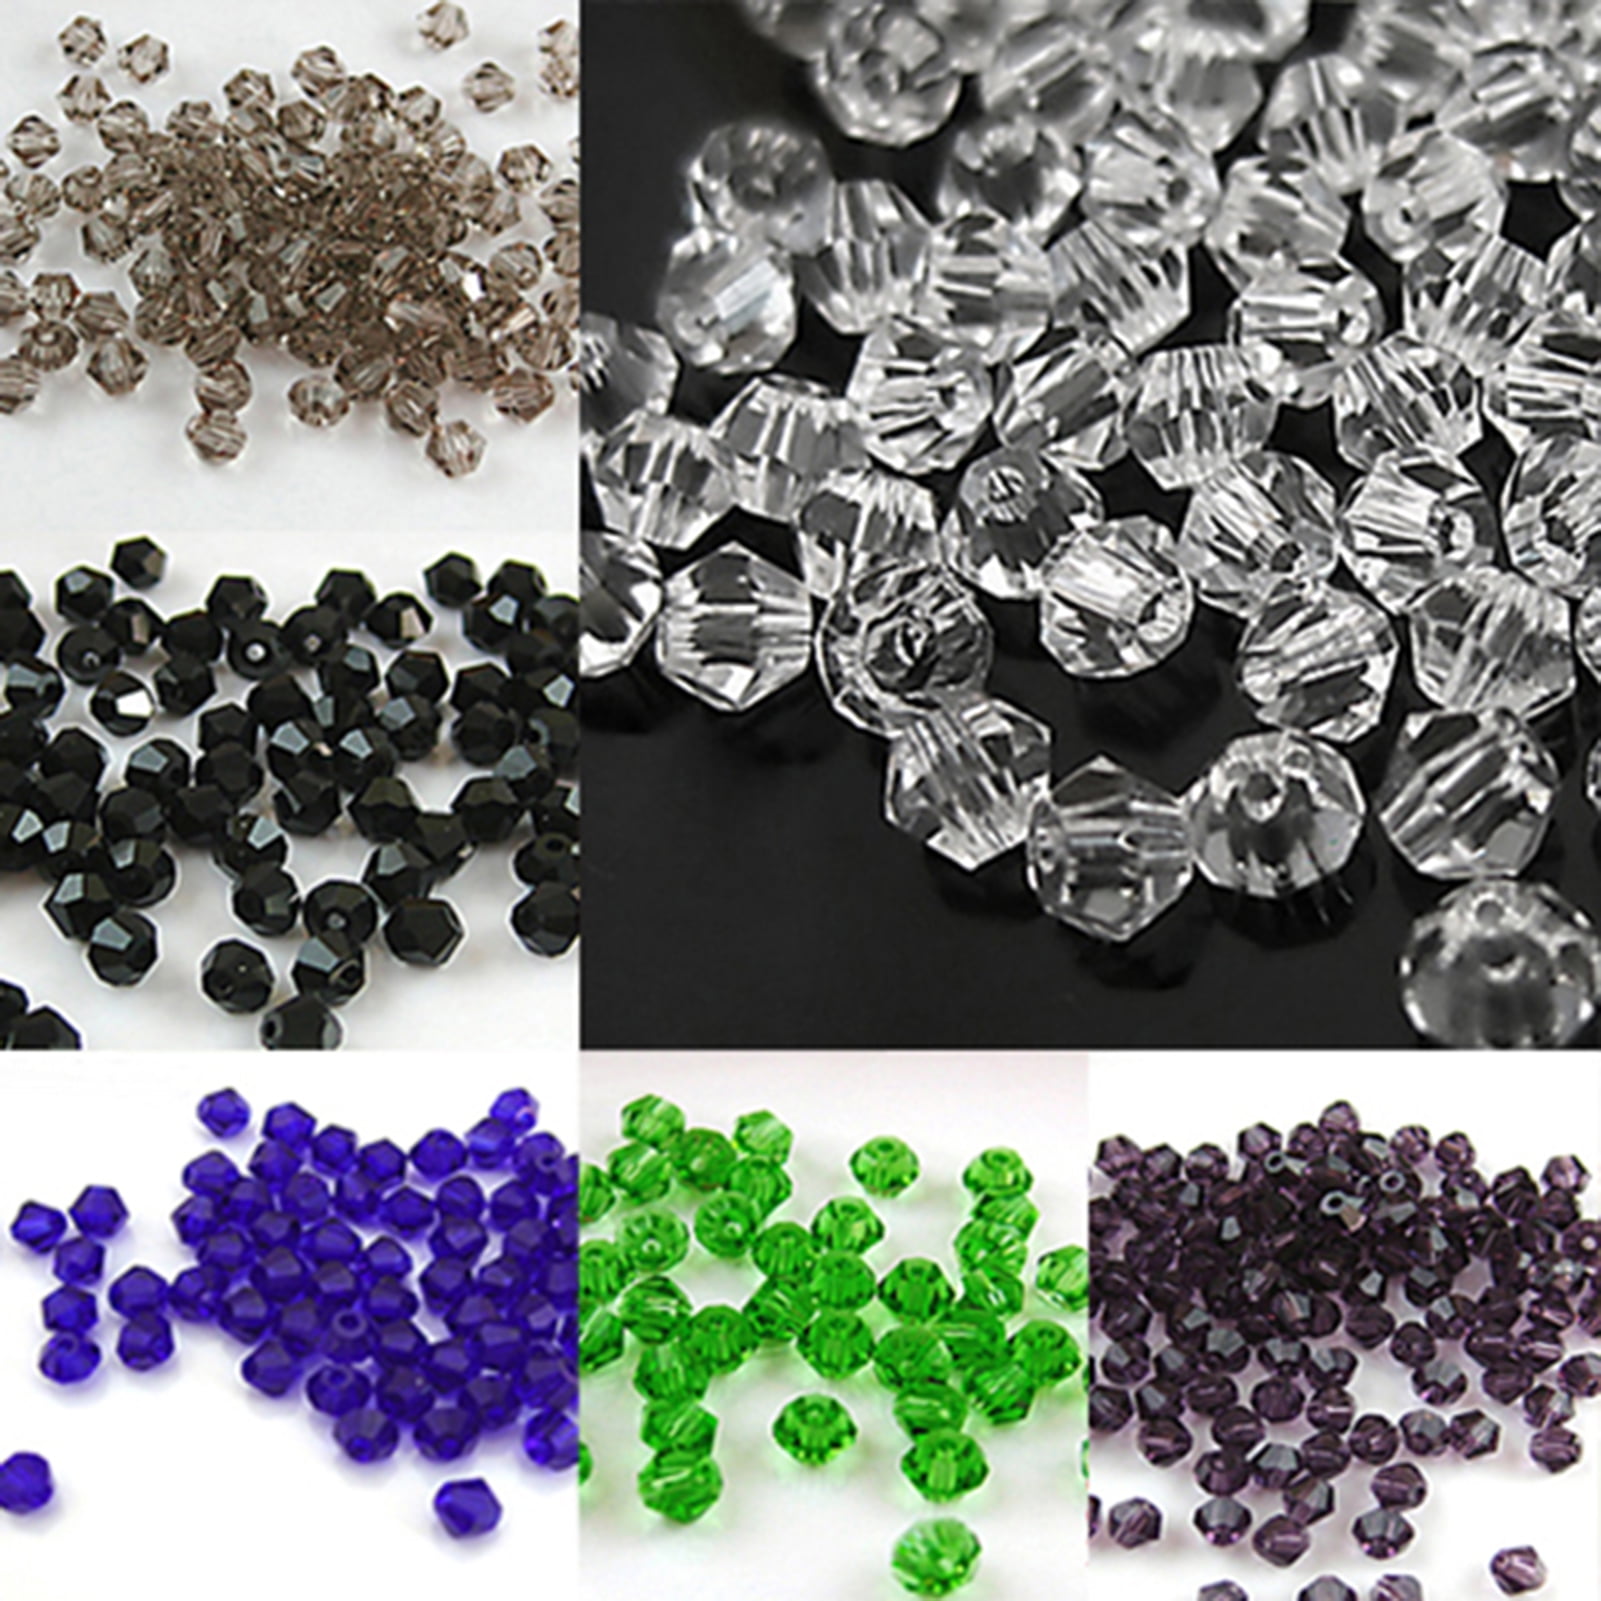 Bulk 500Pcs Faceted Bicone Crystal Glass Beads Loose Jewelry Findings 4mm Beads 